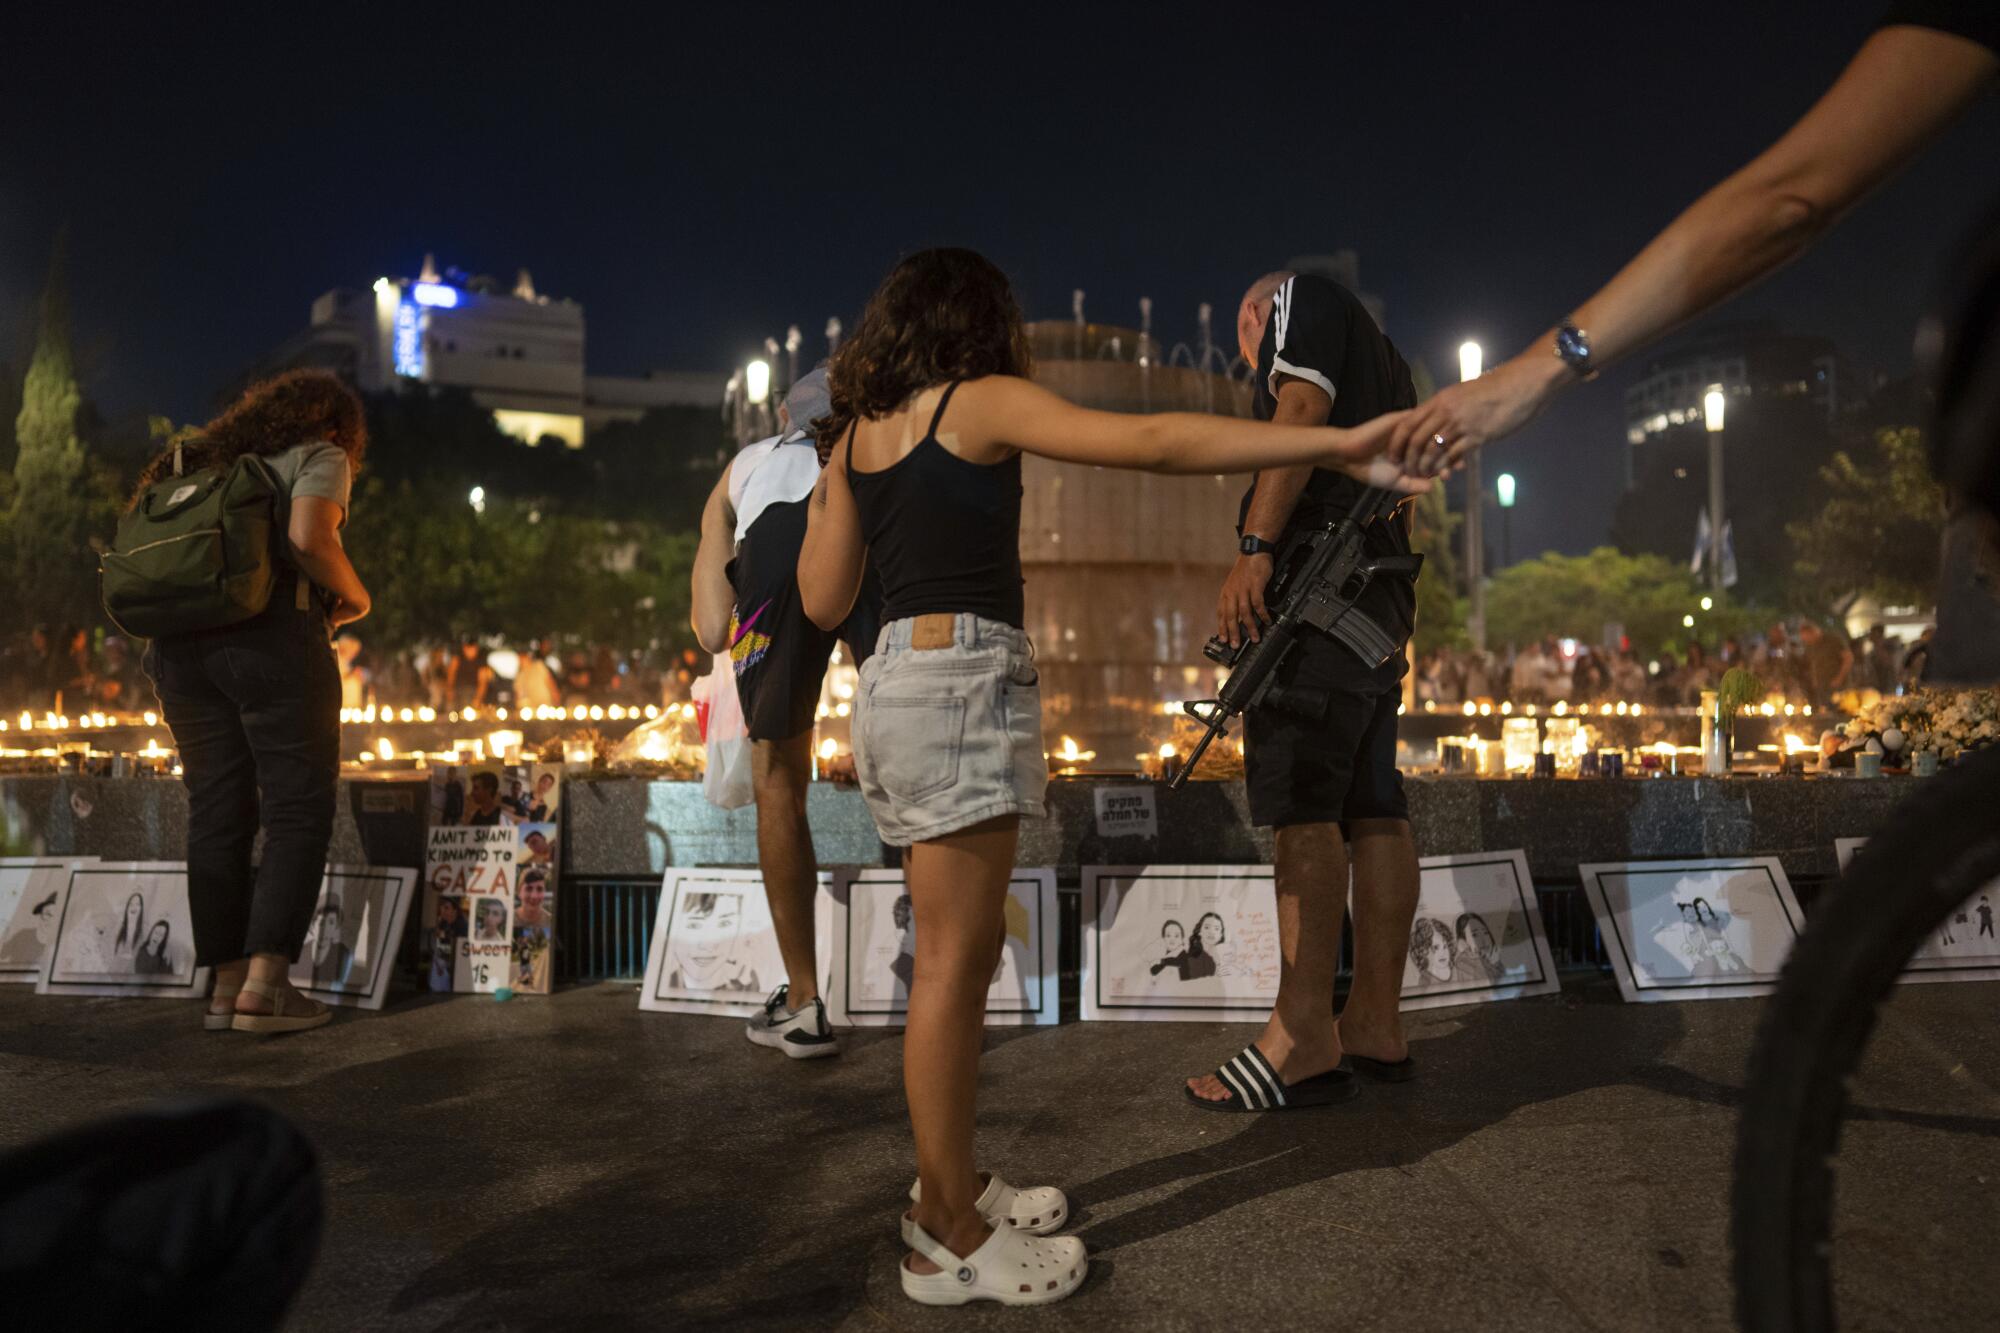 People at a candlelight vigil marking a month since Hamas' attack on Israel